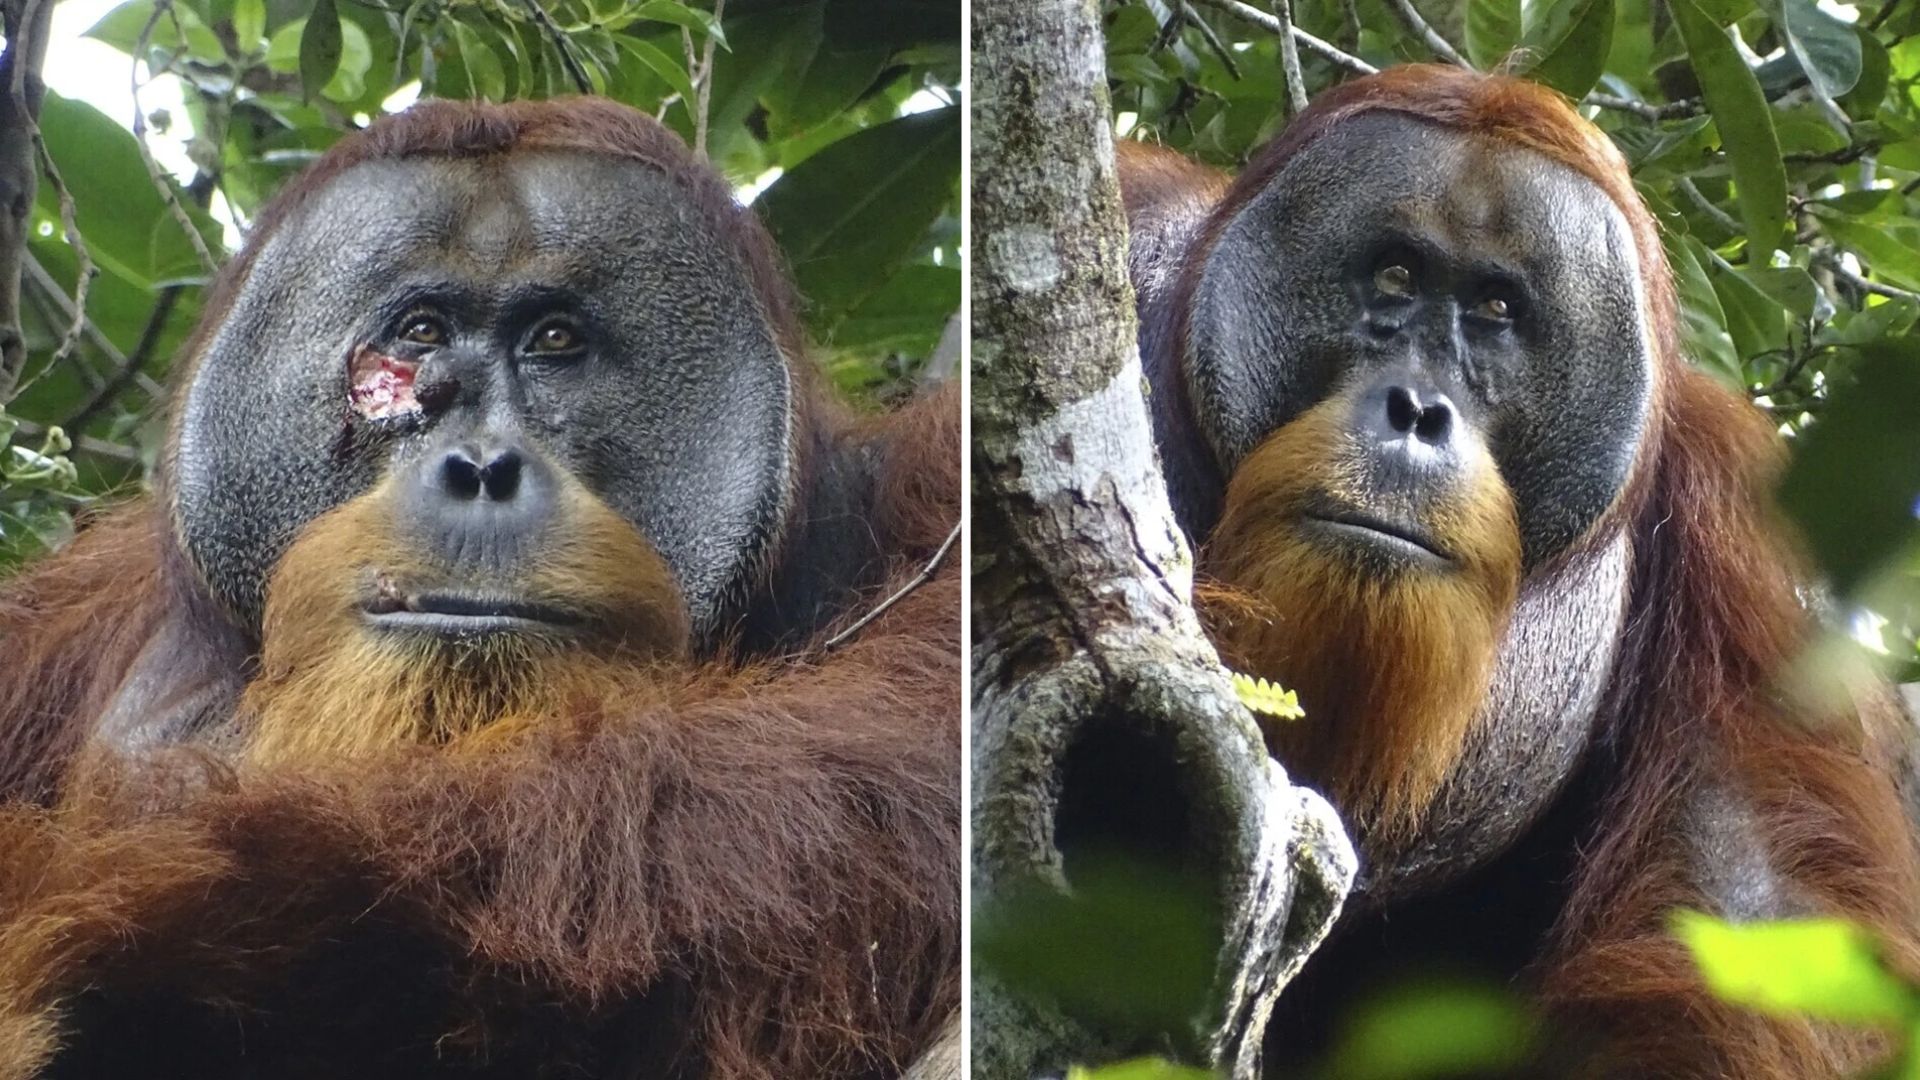 Orangutan treats facial wound with medicinal plant in documented first